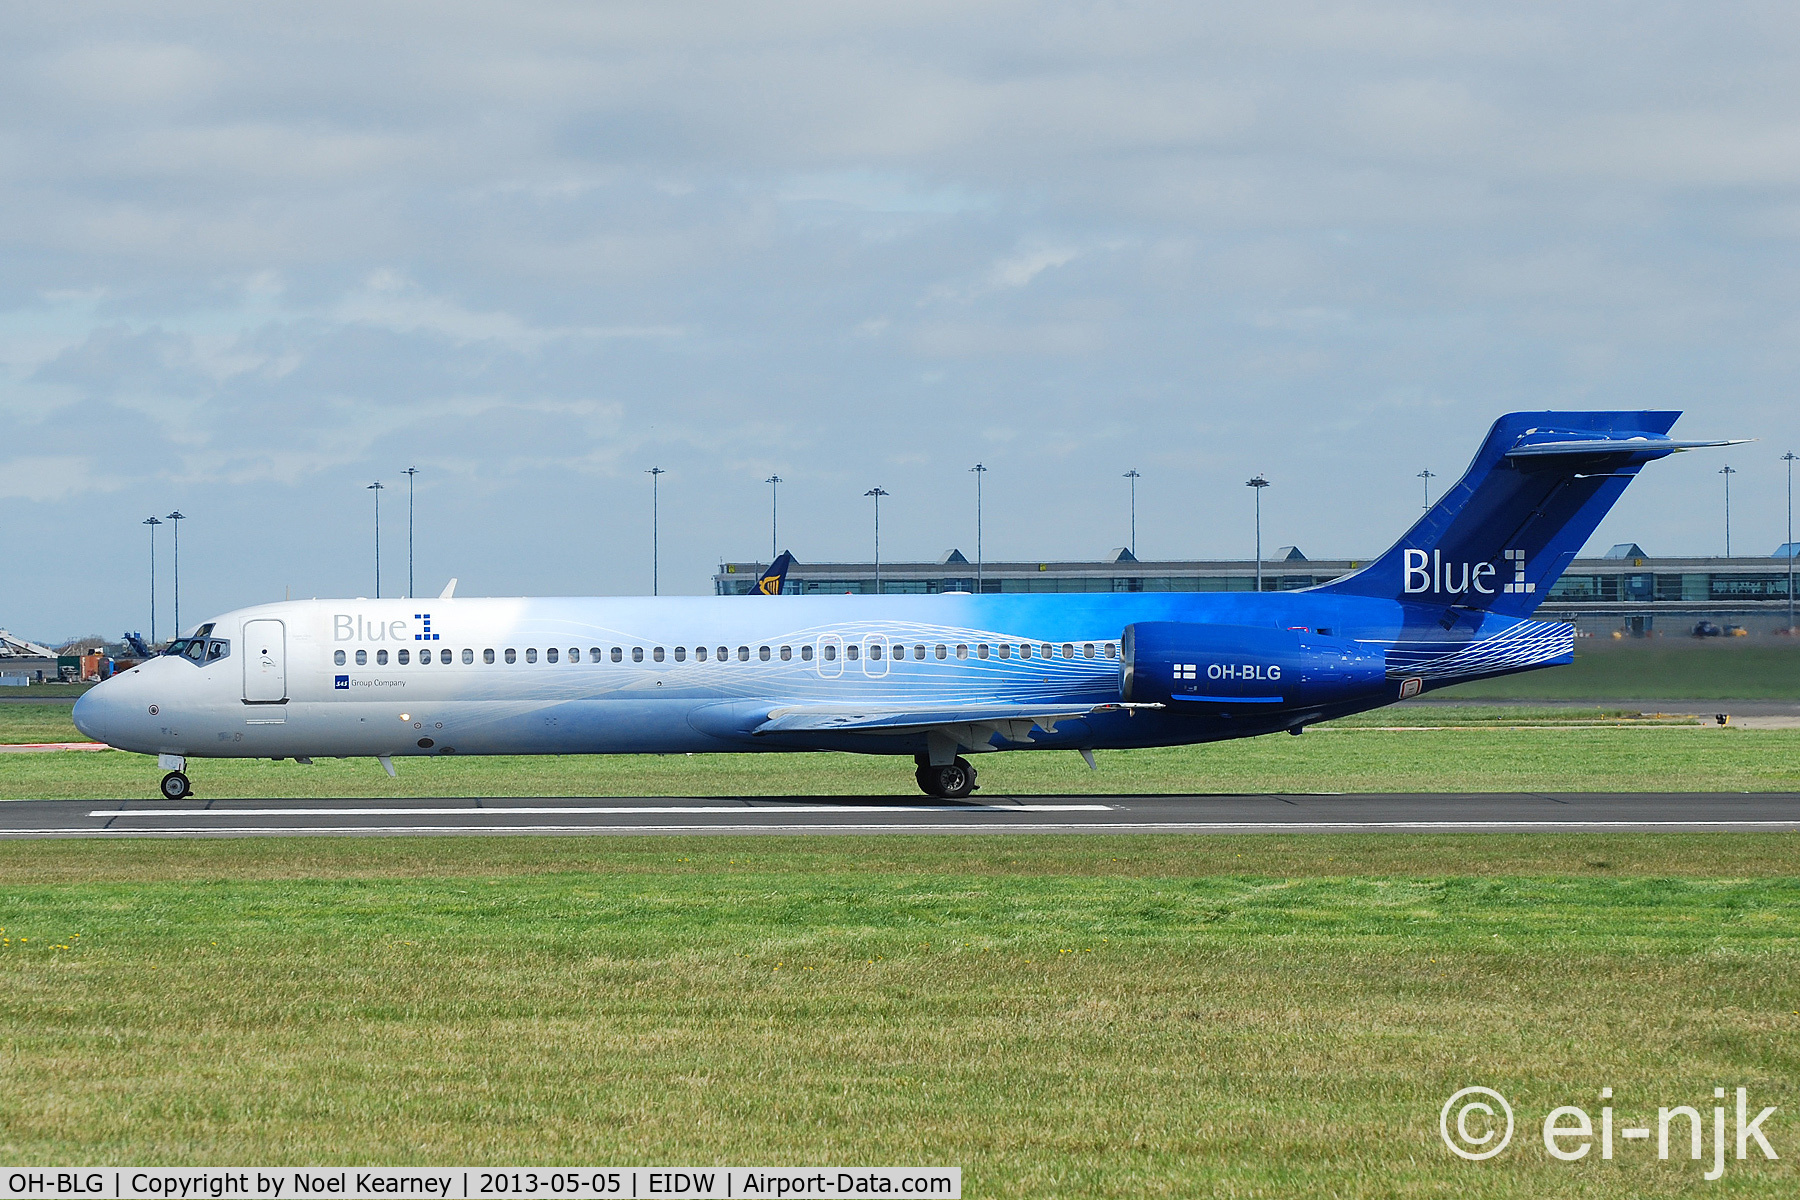 OH-BLG, 2000 Boeing 717-2CM C/N 55059, Lined up for departure off Rwy 28 at Dublin.